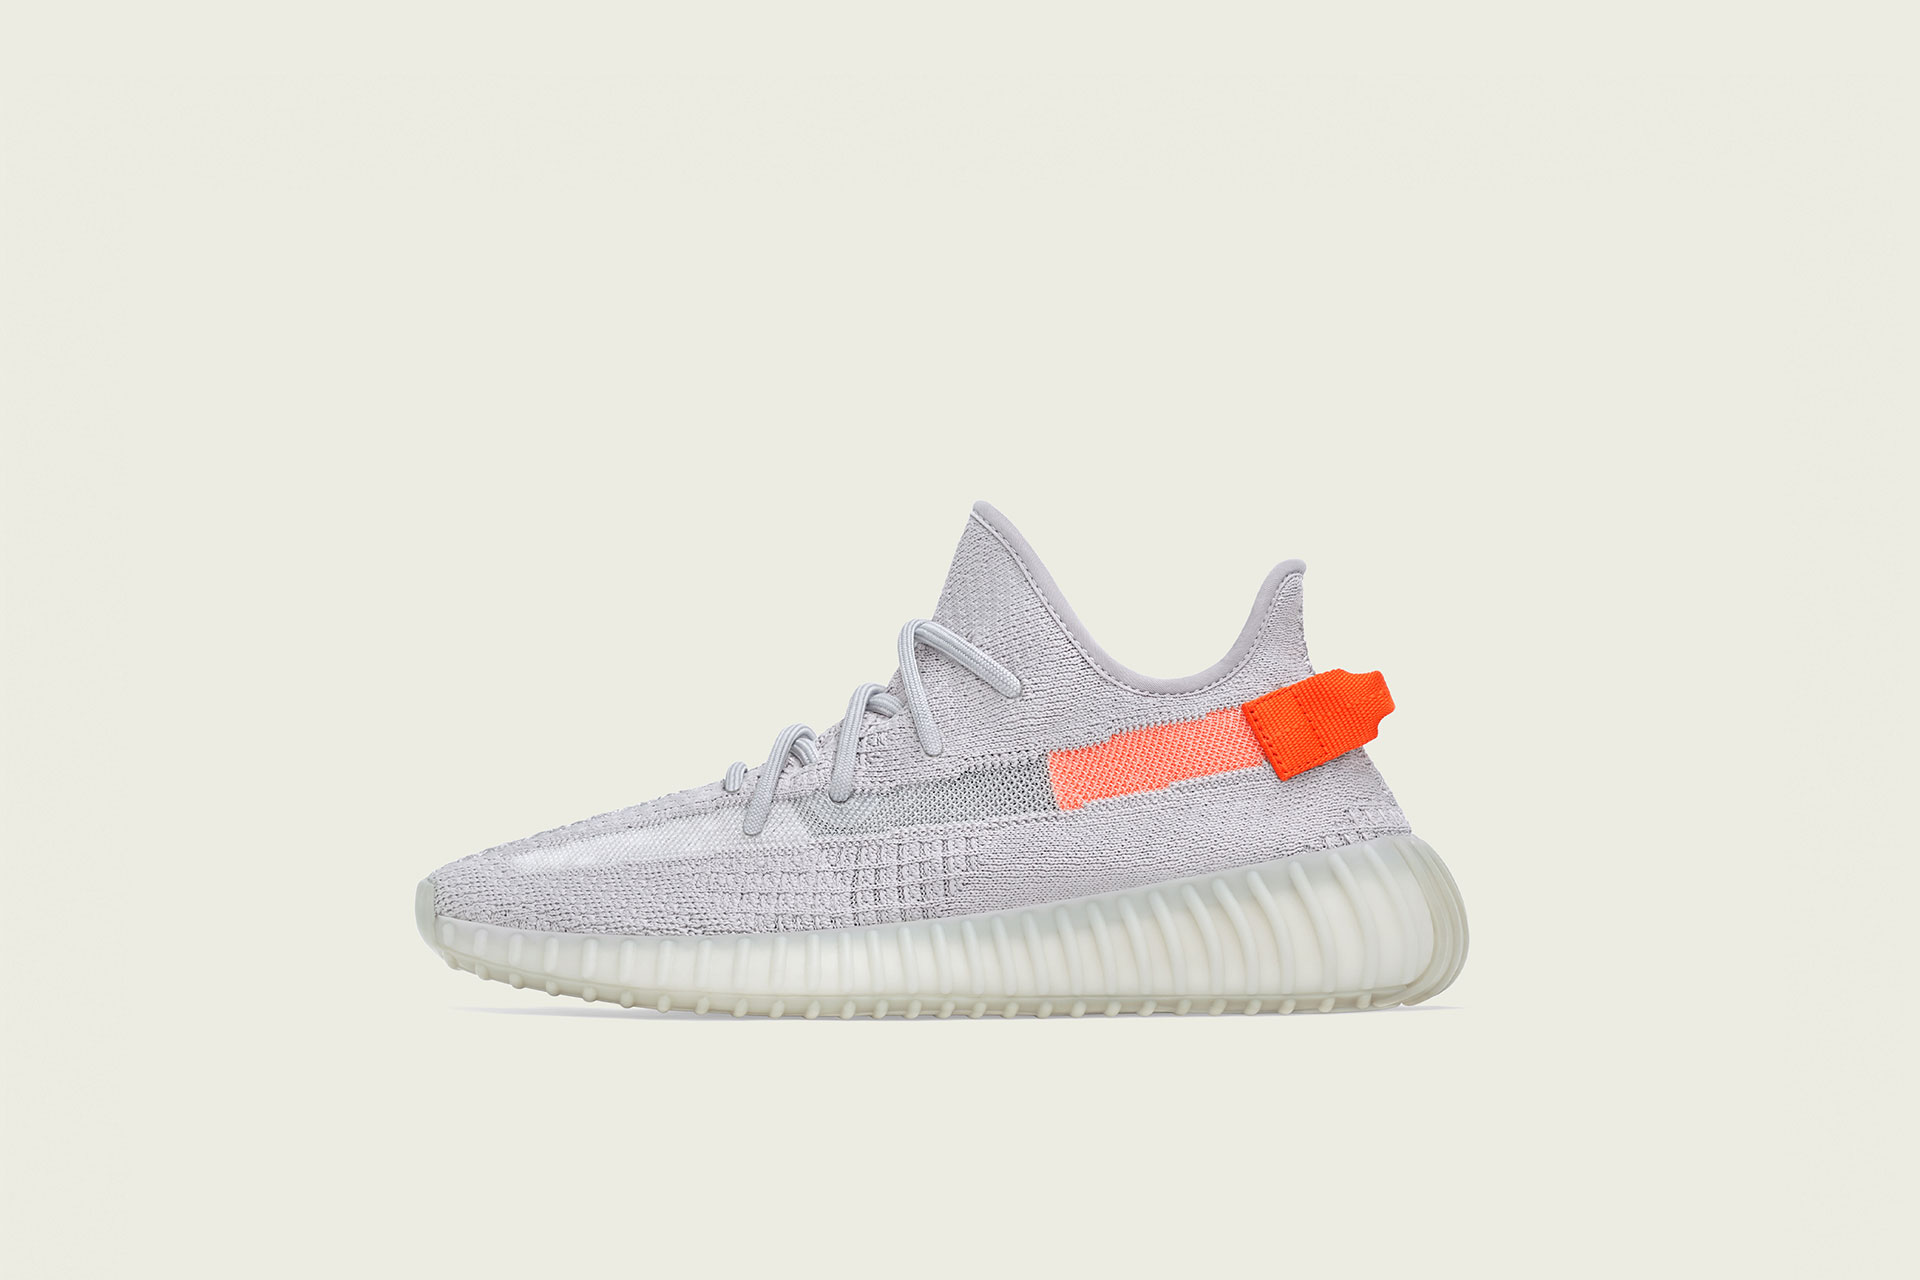 adidas Yeezy Boost 350 V2 - FX9017 - Tail Light - Footshop - Releases